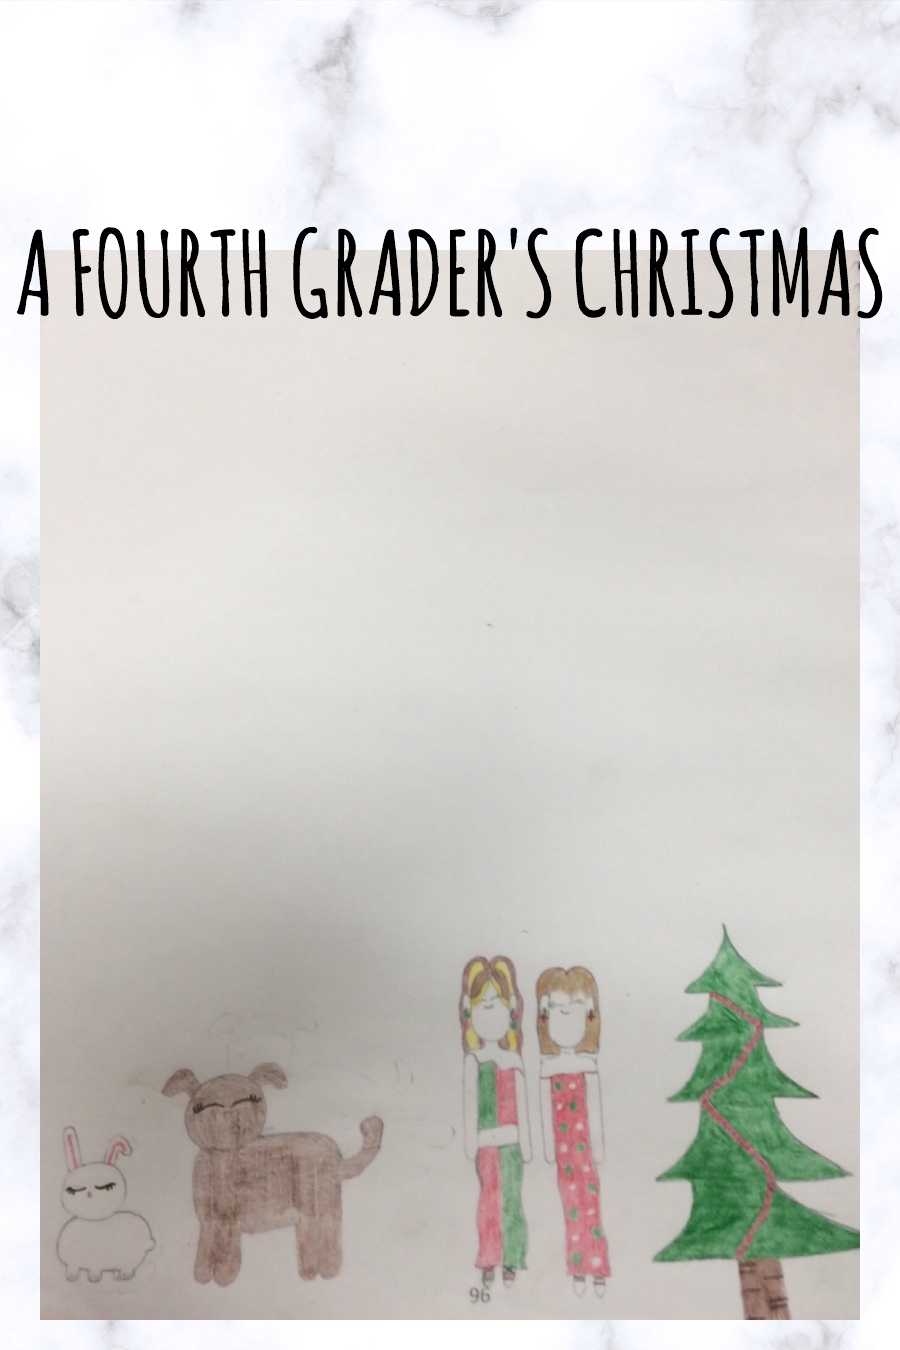 A Fourth Grader’s Christmas by Lexi M